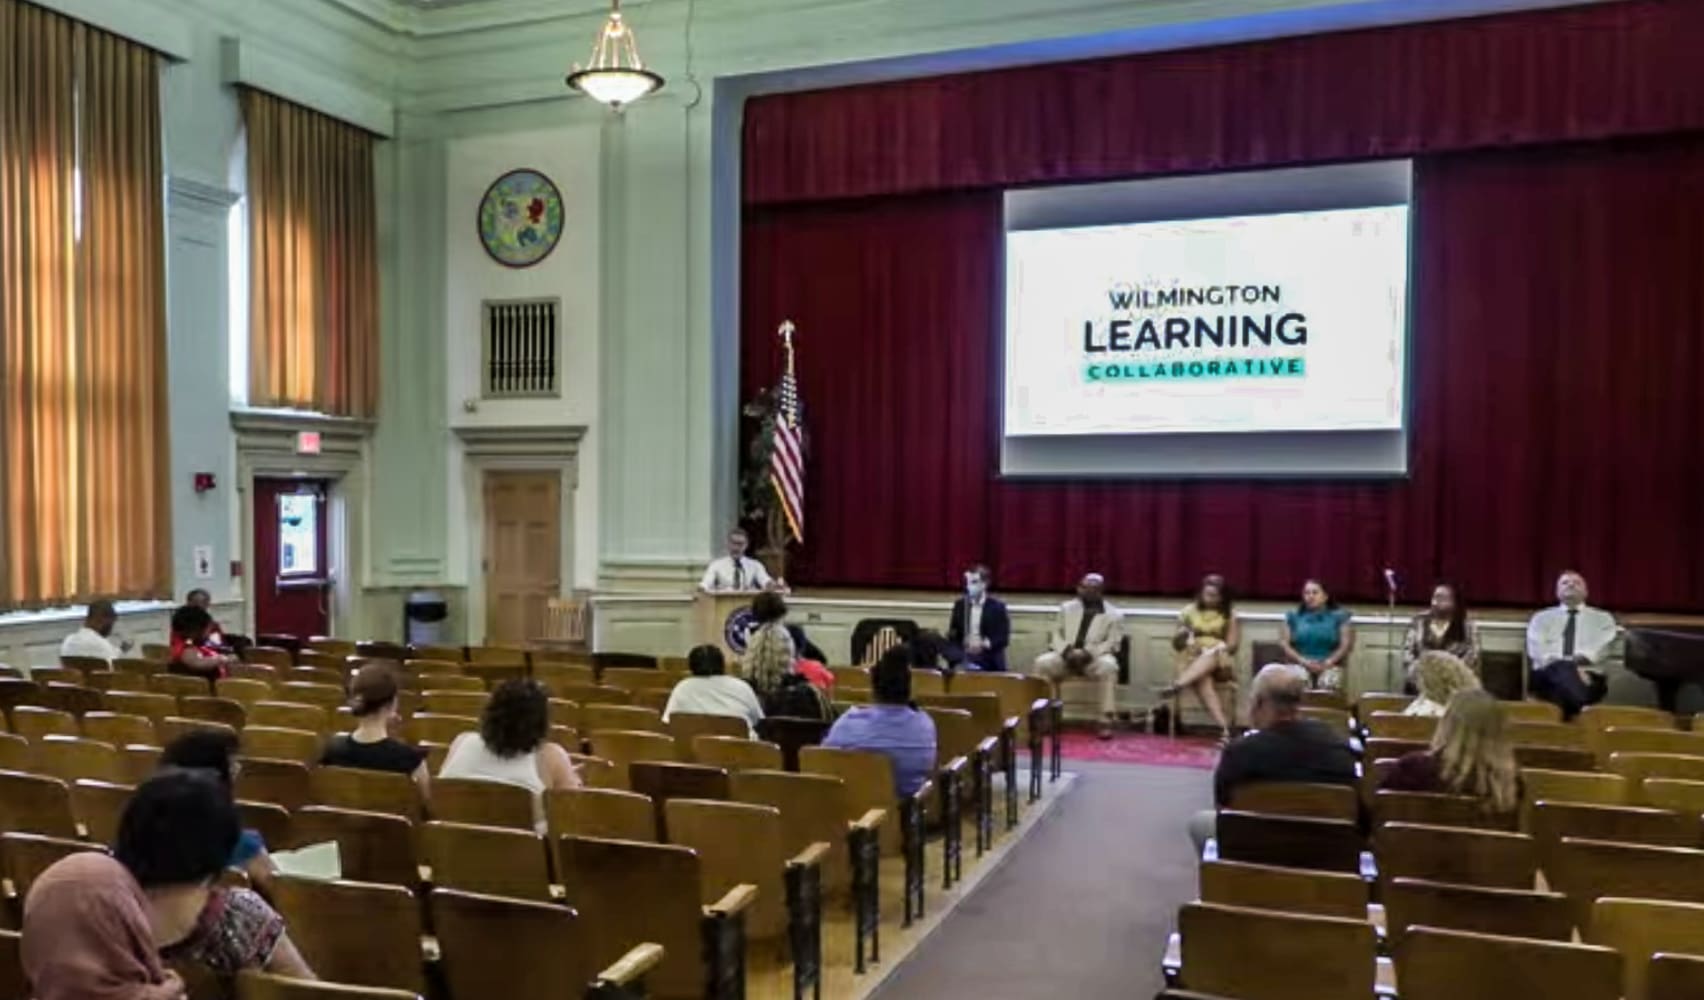 The three districts in the Wilmington Learning Collaborative will meet Aug. 30.